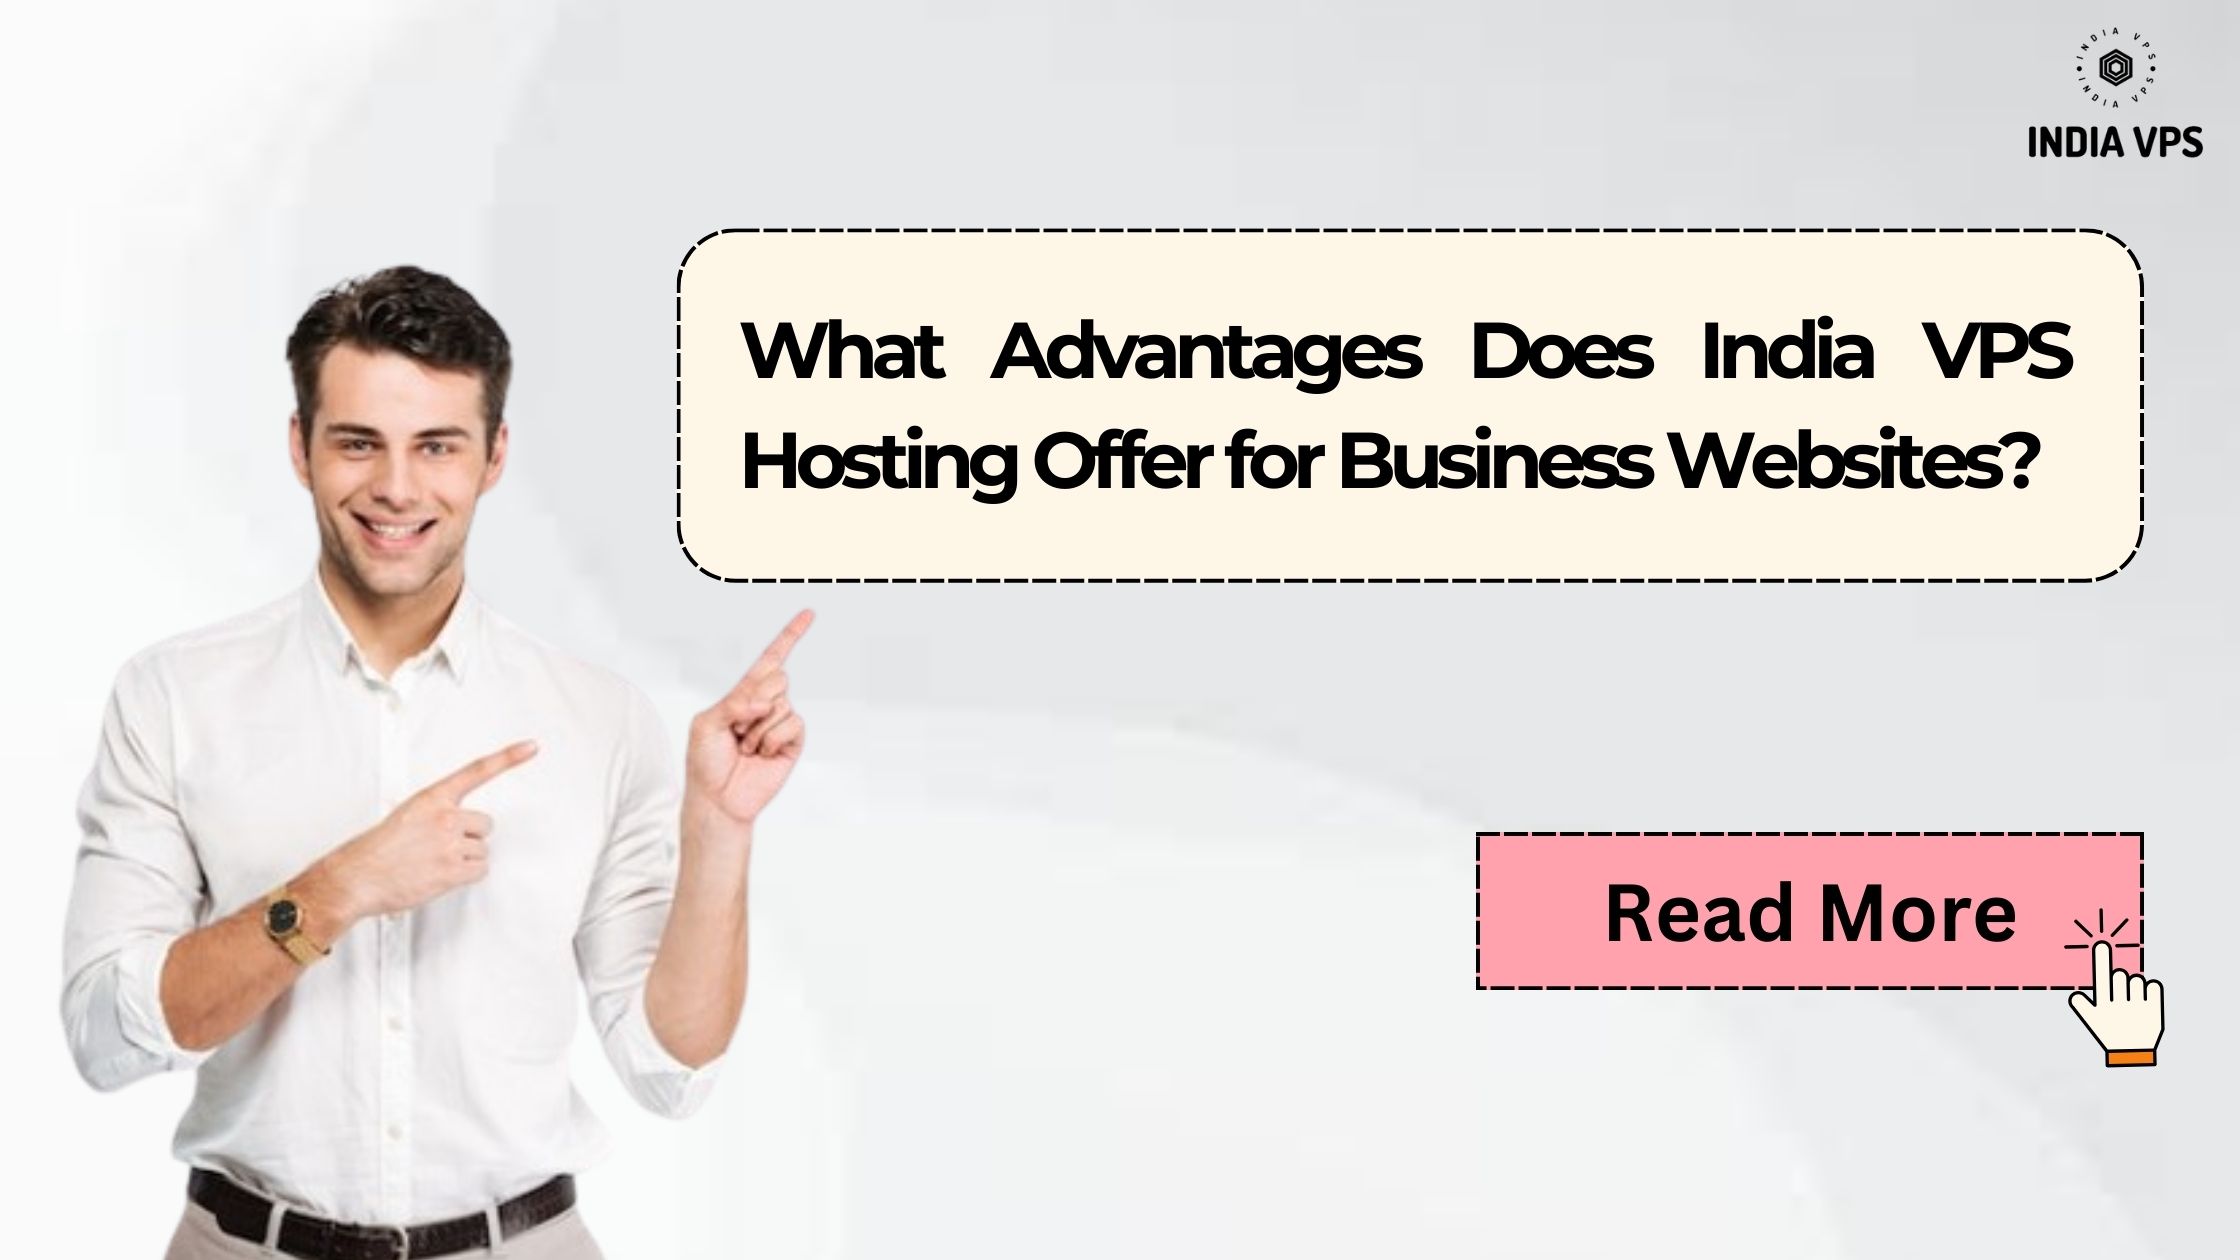 What Advantages Does India VPS Hosting Offer for Business Websites?